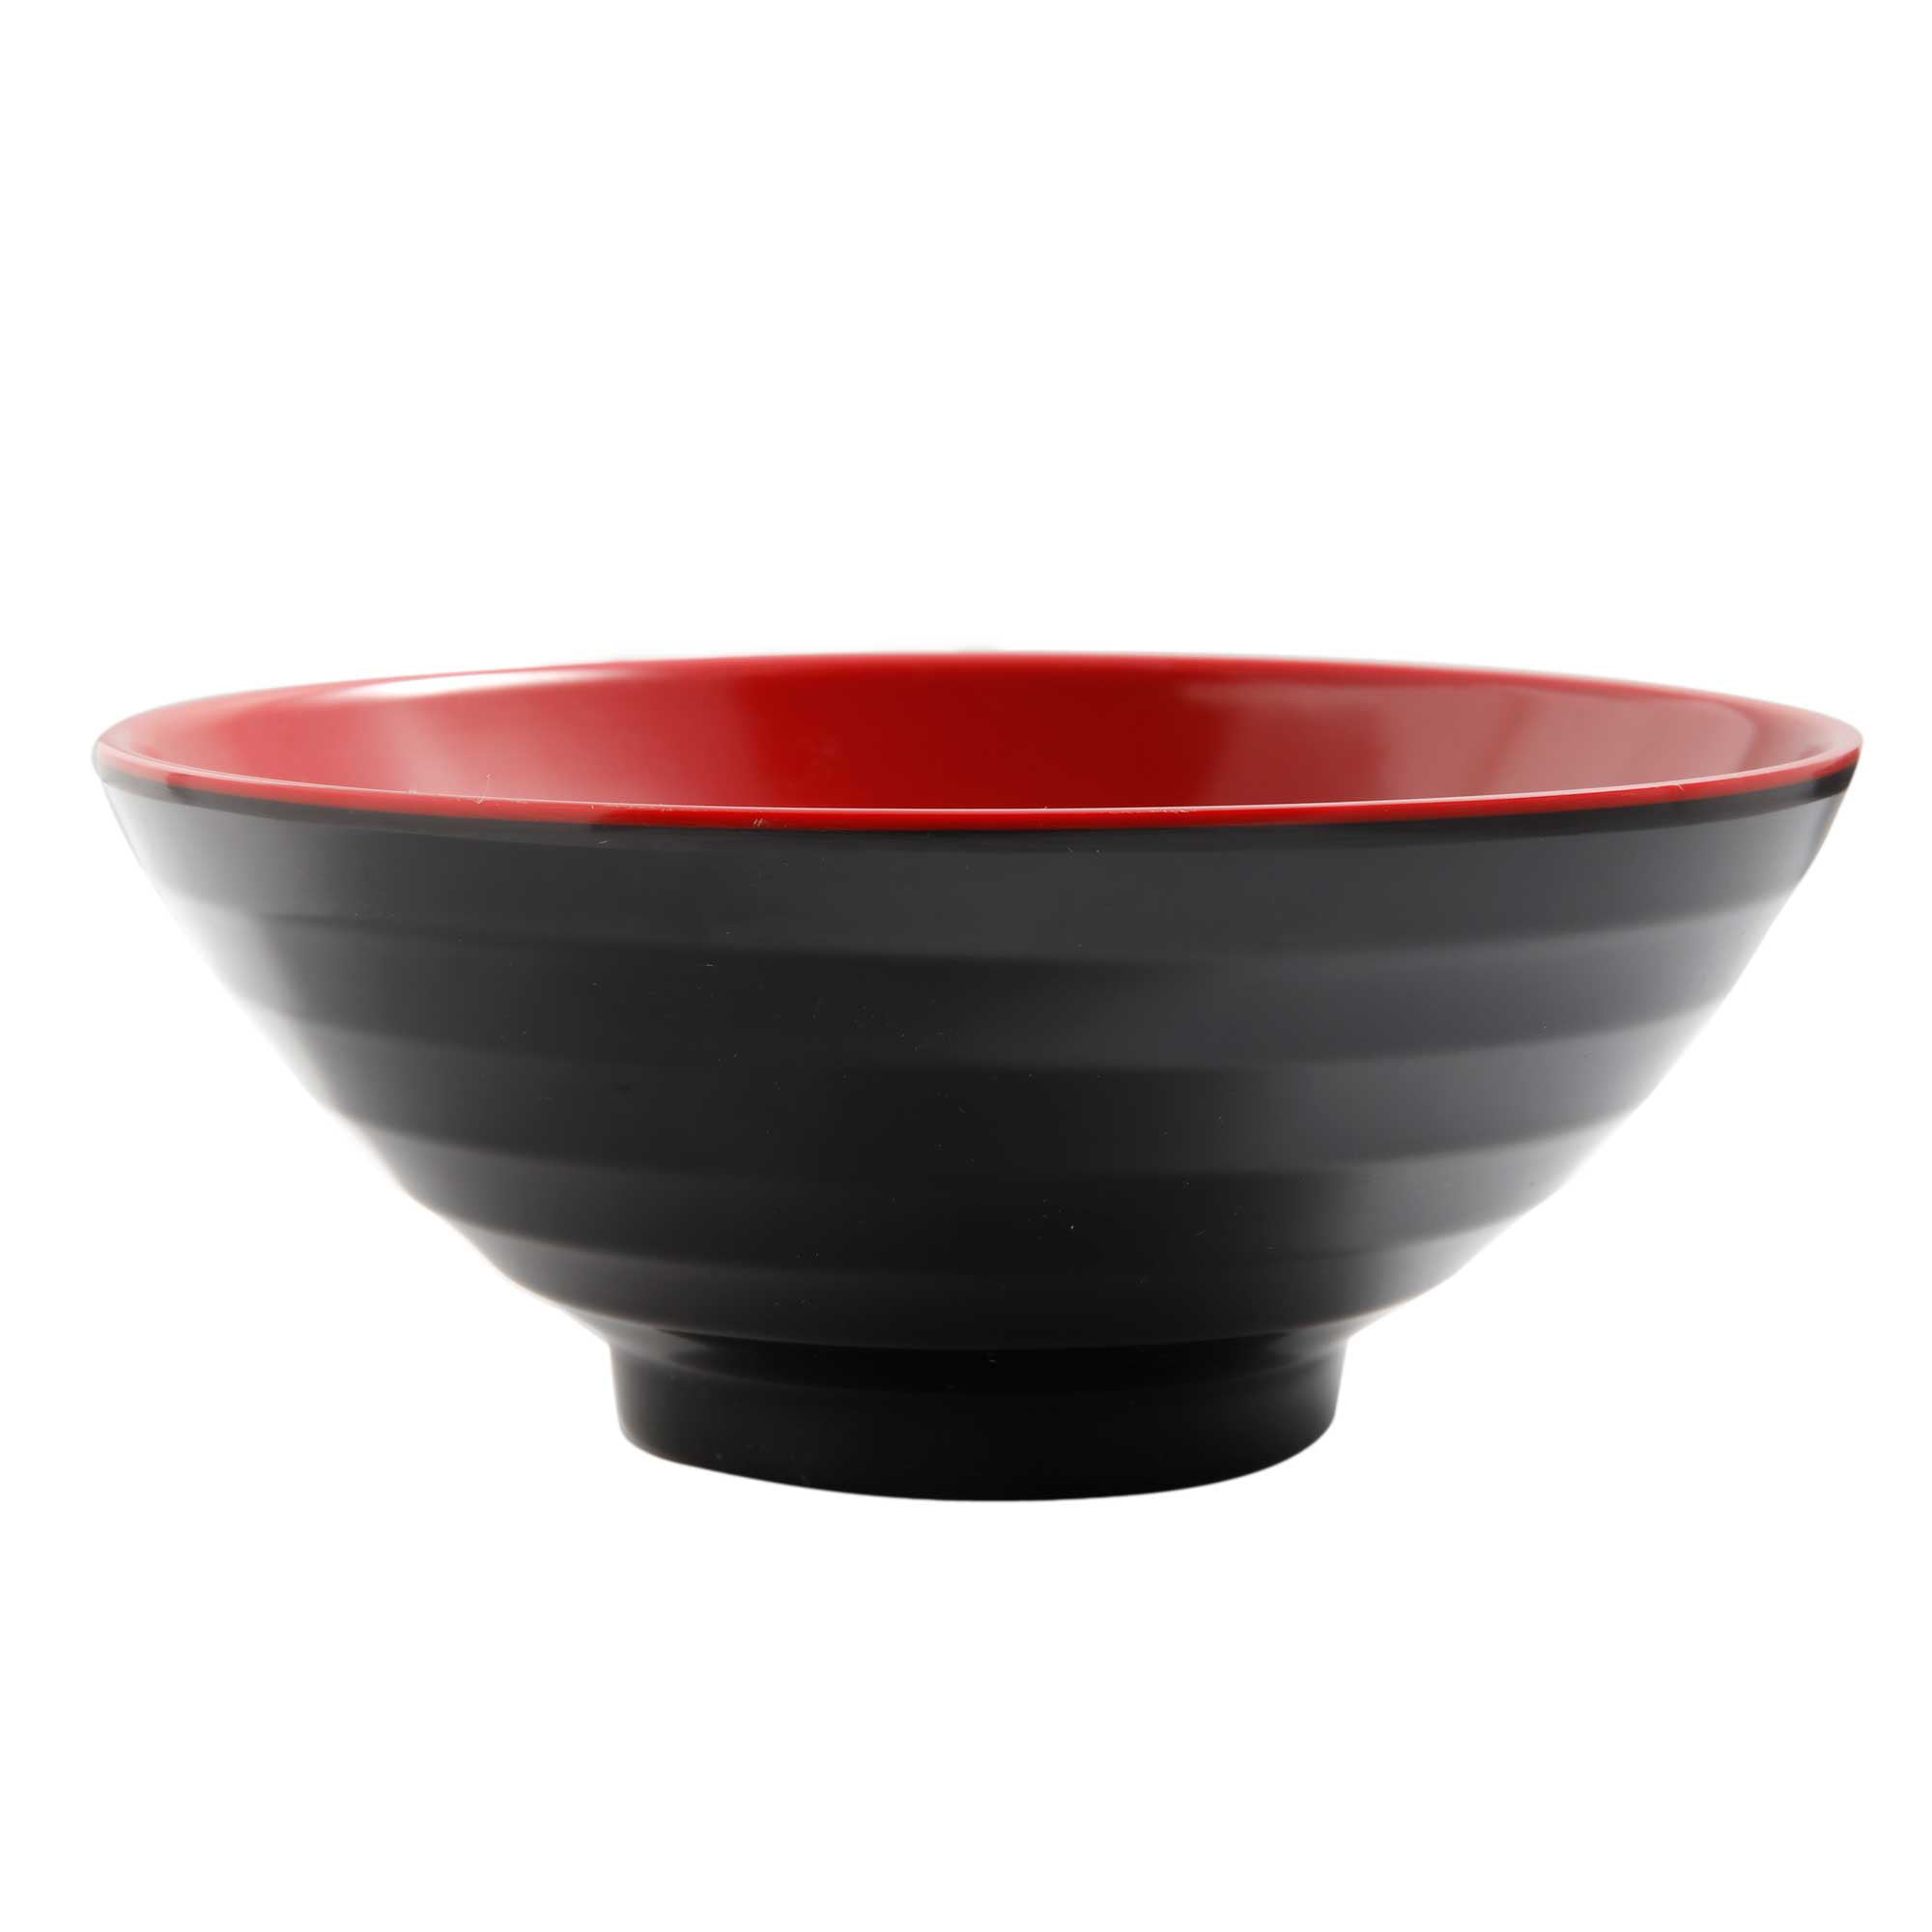 Set of 4 味噌湯ボウルLarge Melamine Noodle Soup Bowls and Spoons Red and Black 